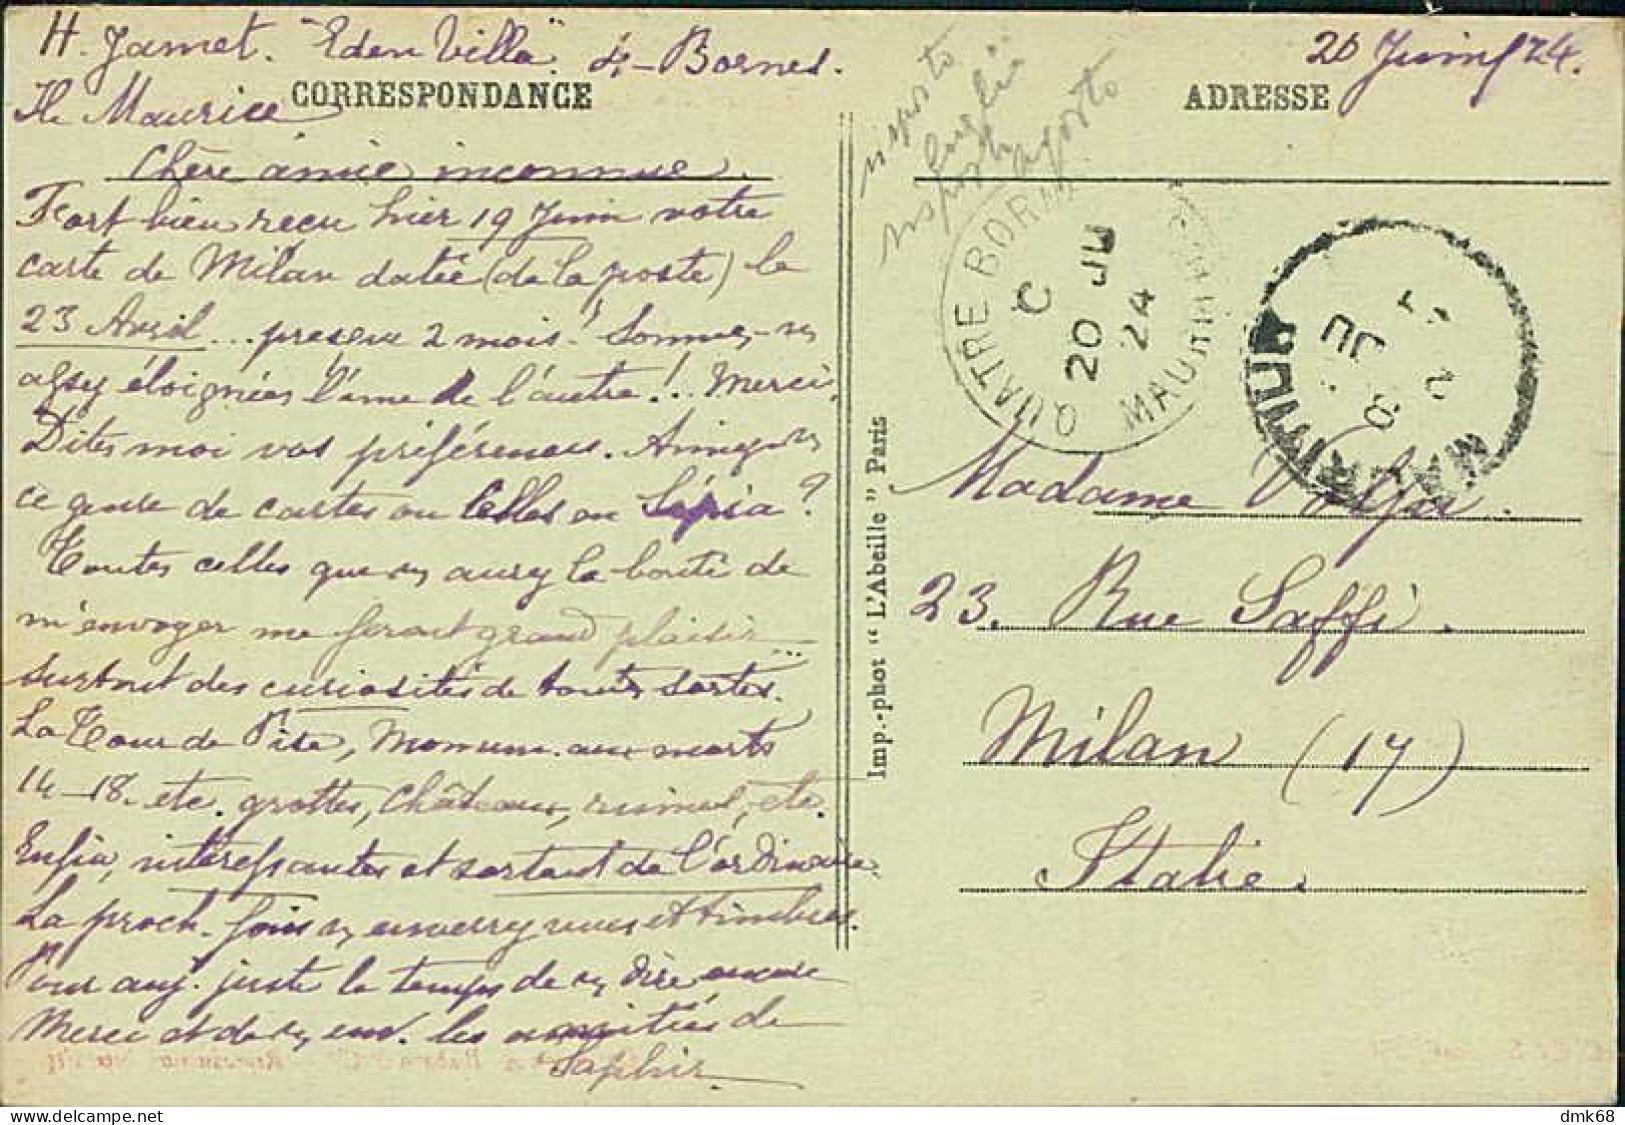 AFRICA - MAURITIUS / ILE MAURICE - PORT LOUIS - MOSQUE / LA MOSQUEE  - PHOT. L'ABEILLE - MAILED 1924 / STAMP (12574) - Maurice